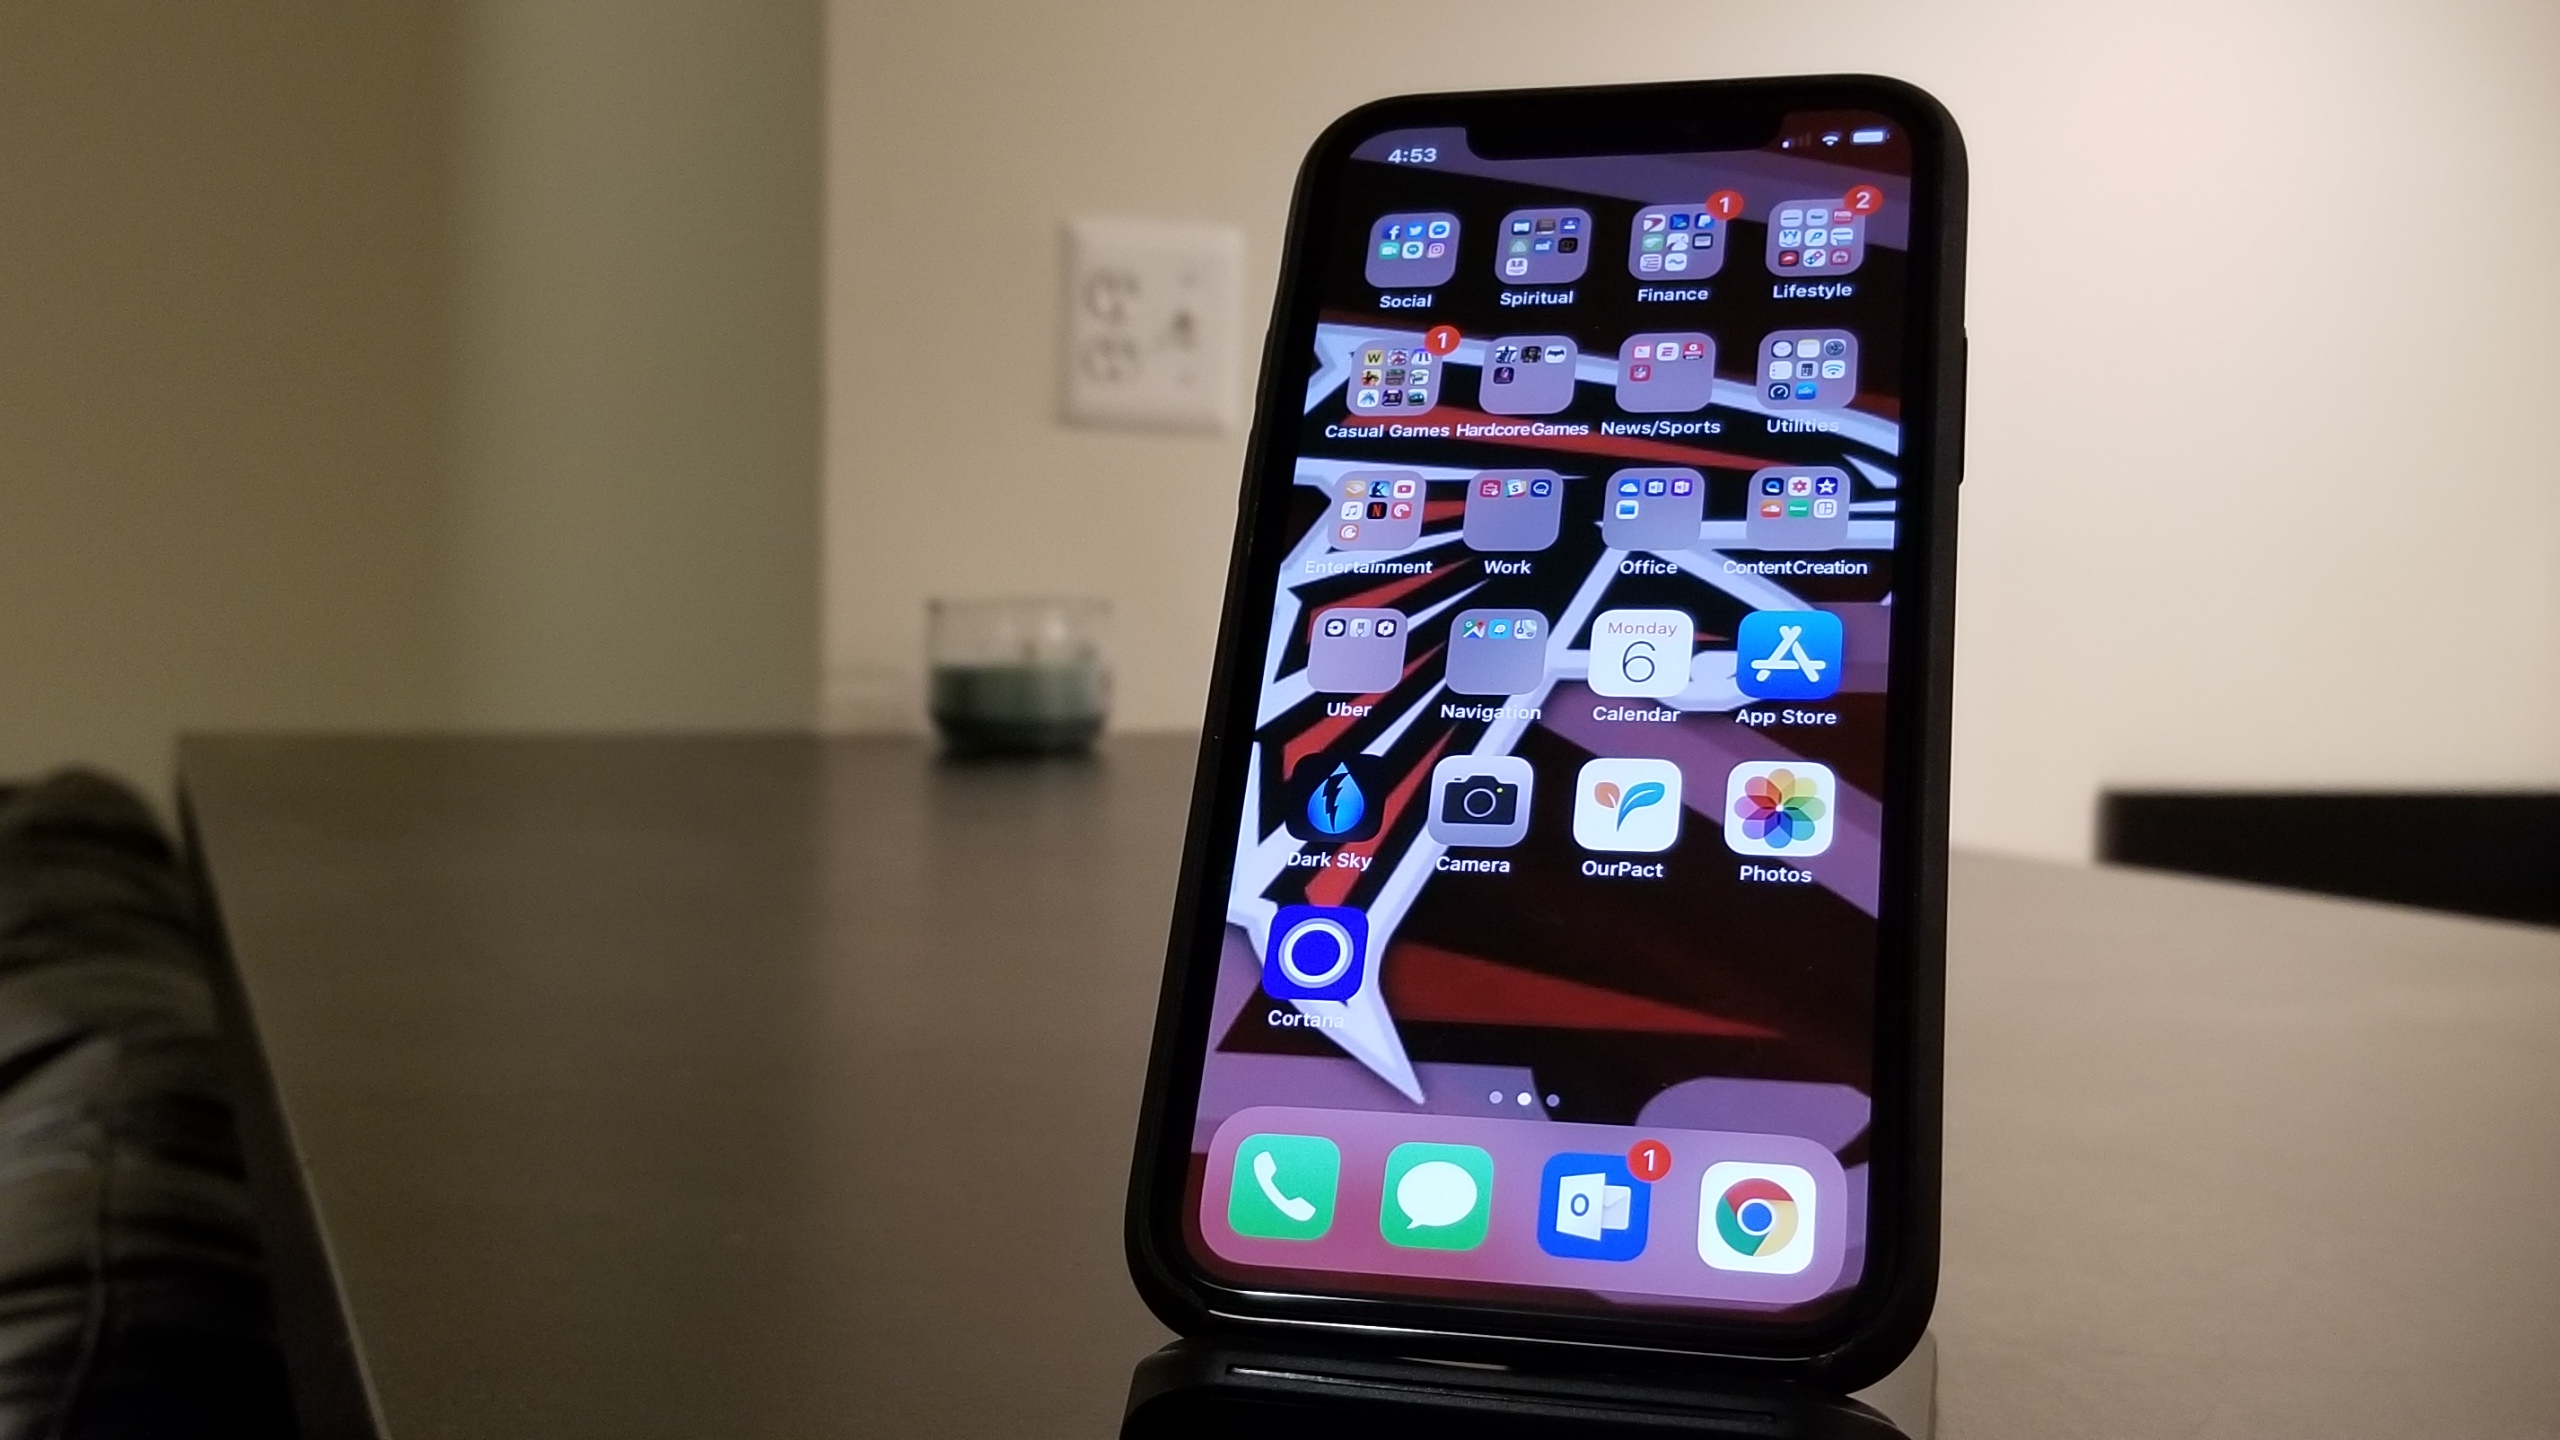 Apple reportedly restarting production of the iPhone X after iPhone XS sales disappoint